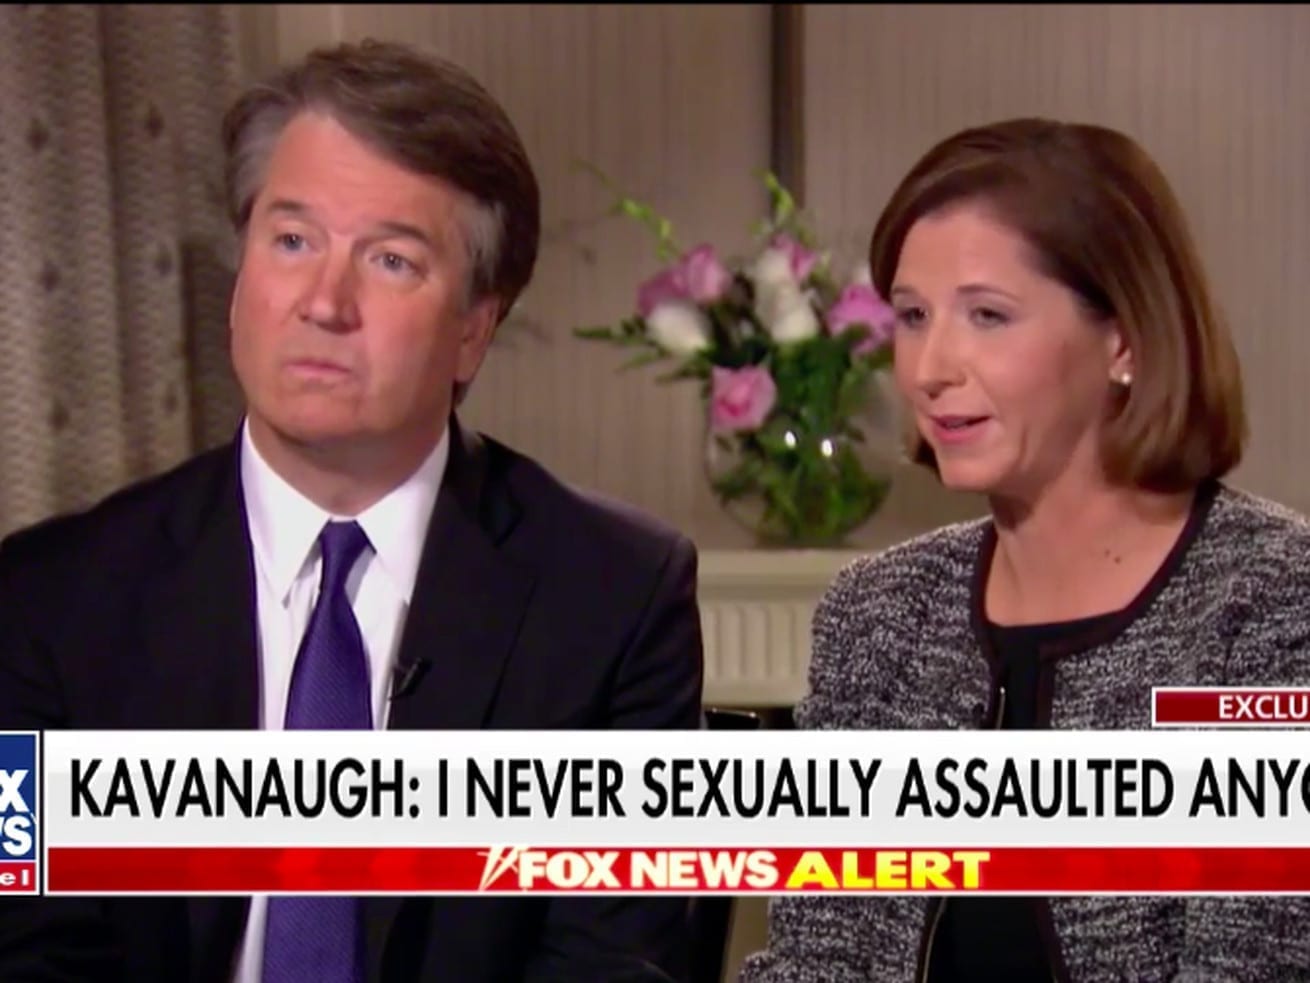 In 1991, Virginia Thomas defended her husband. Now Brett Kavanaugh’s wife is doing the same.